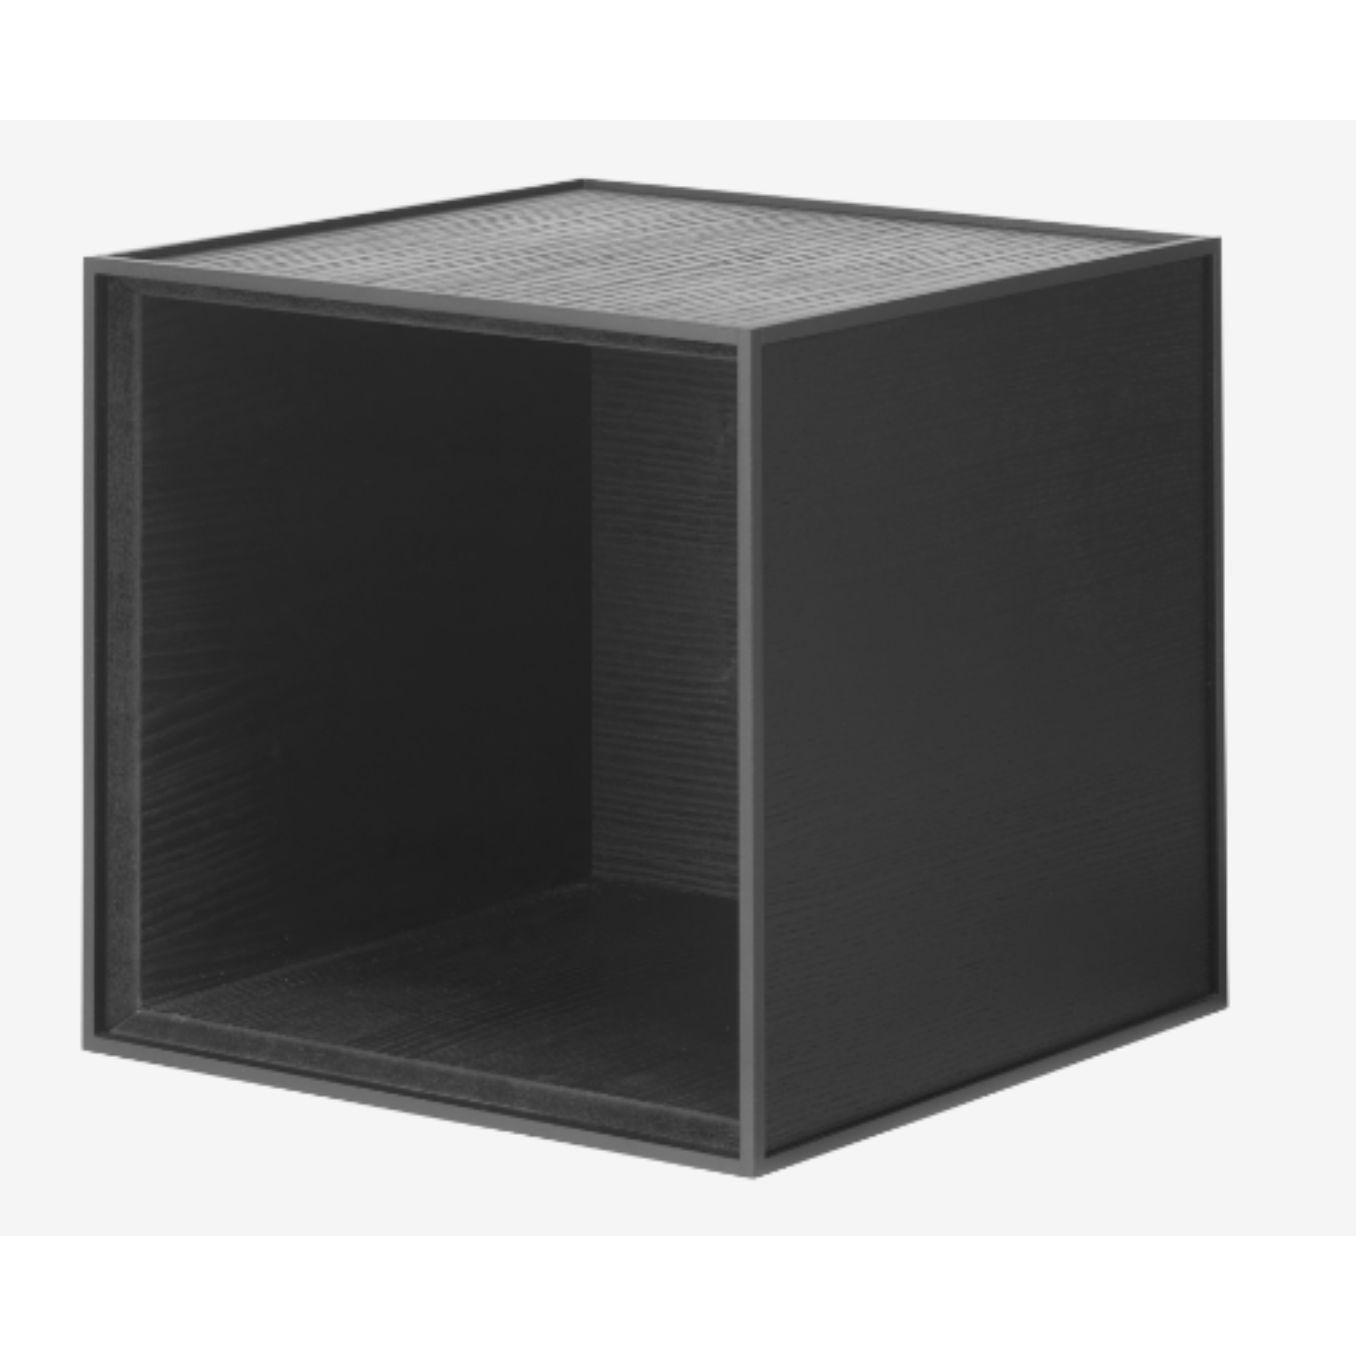 28 black ash frame box by Lassen
Dimensions: W 28 x D 28 x H 28 cm 
Materials: Finér, melamin, melamin, melamine, metal, veneer, oak
Also available in different colors and dimensions. 

By Lassen is a Danish design brand focused on iconic